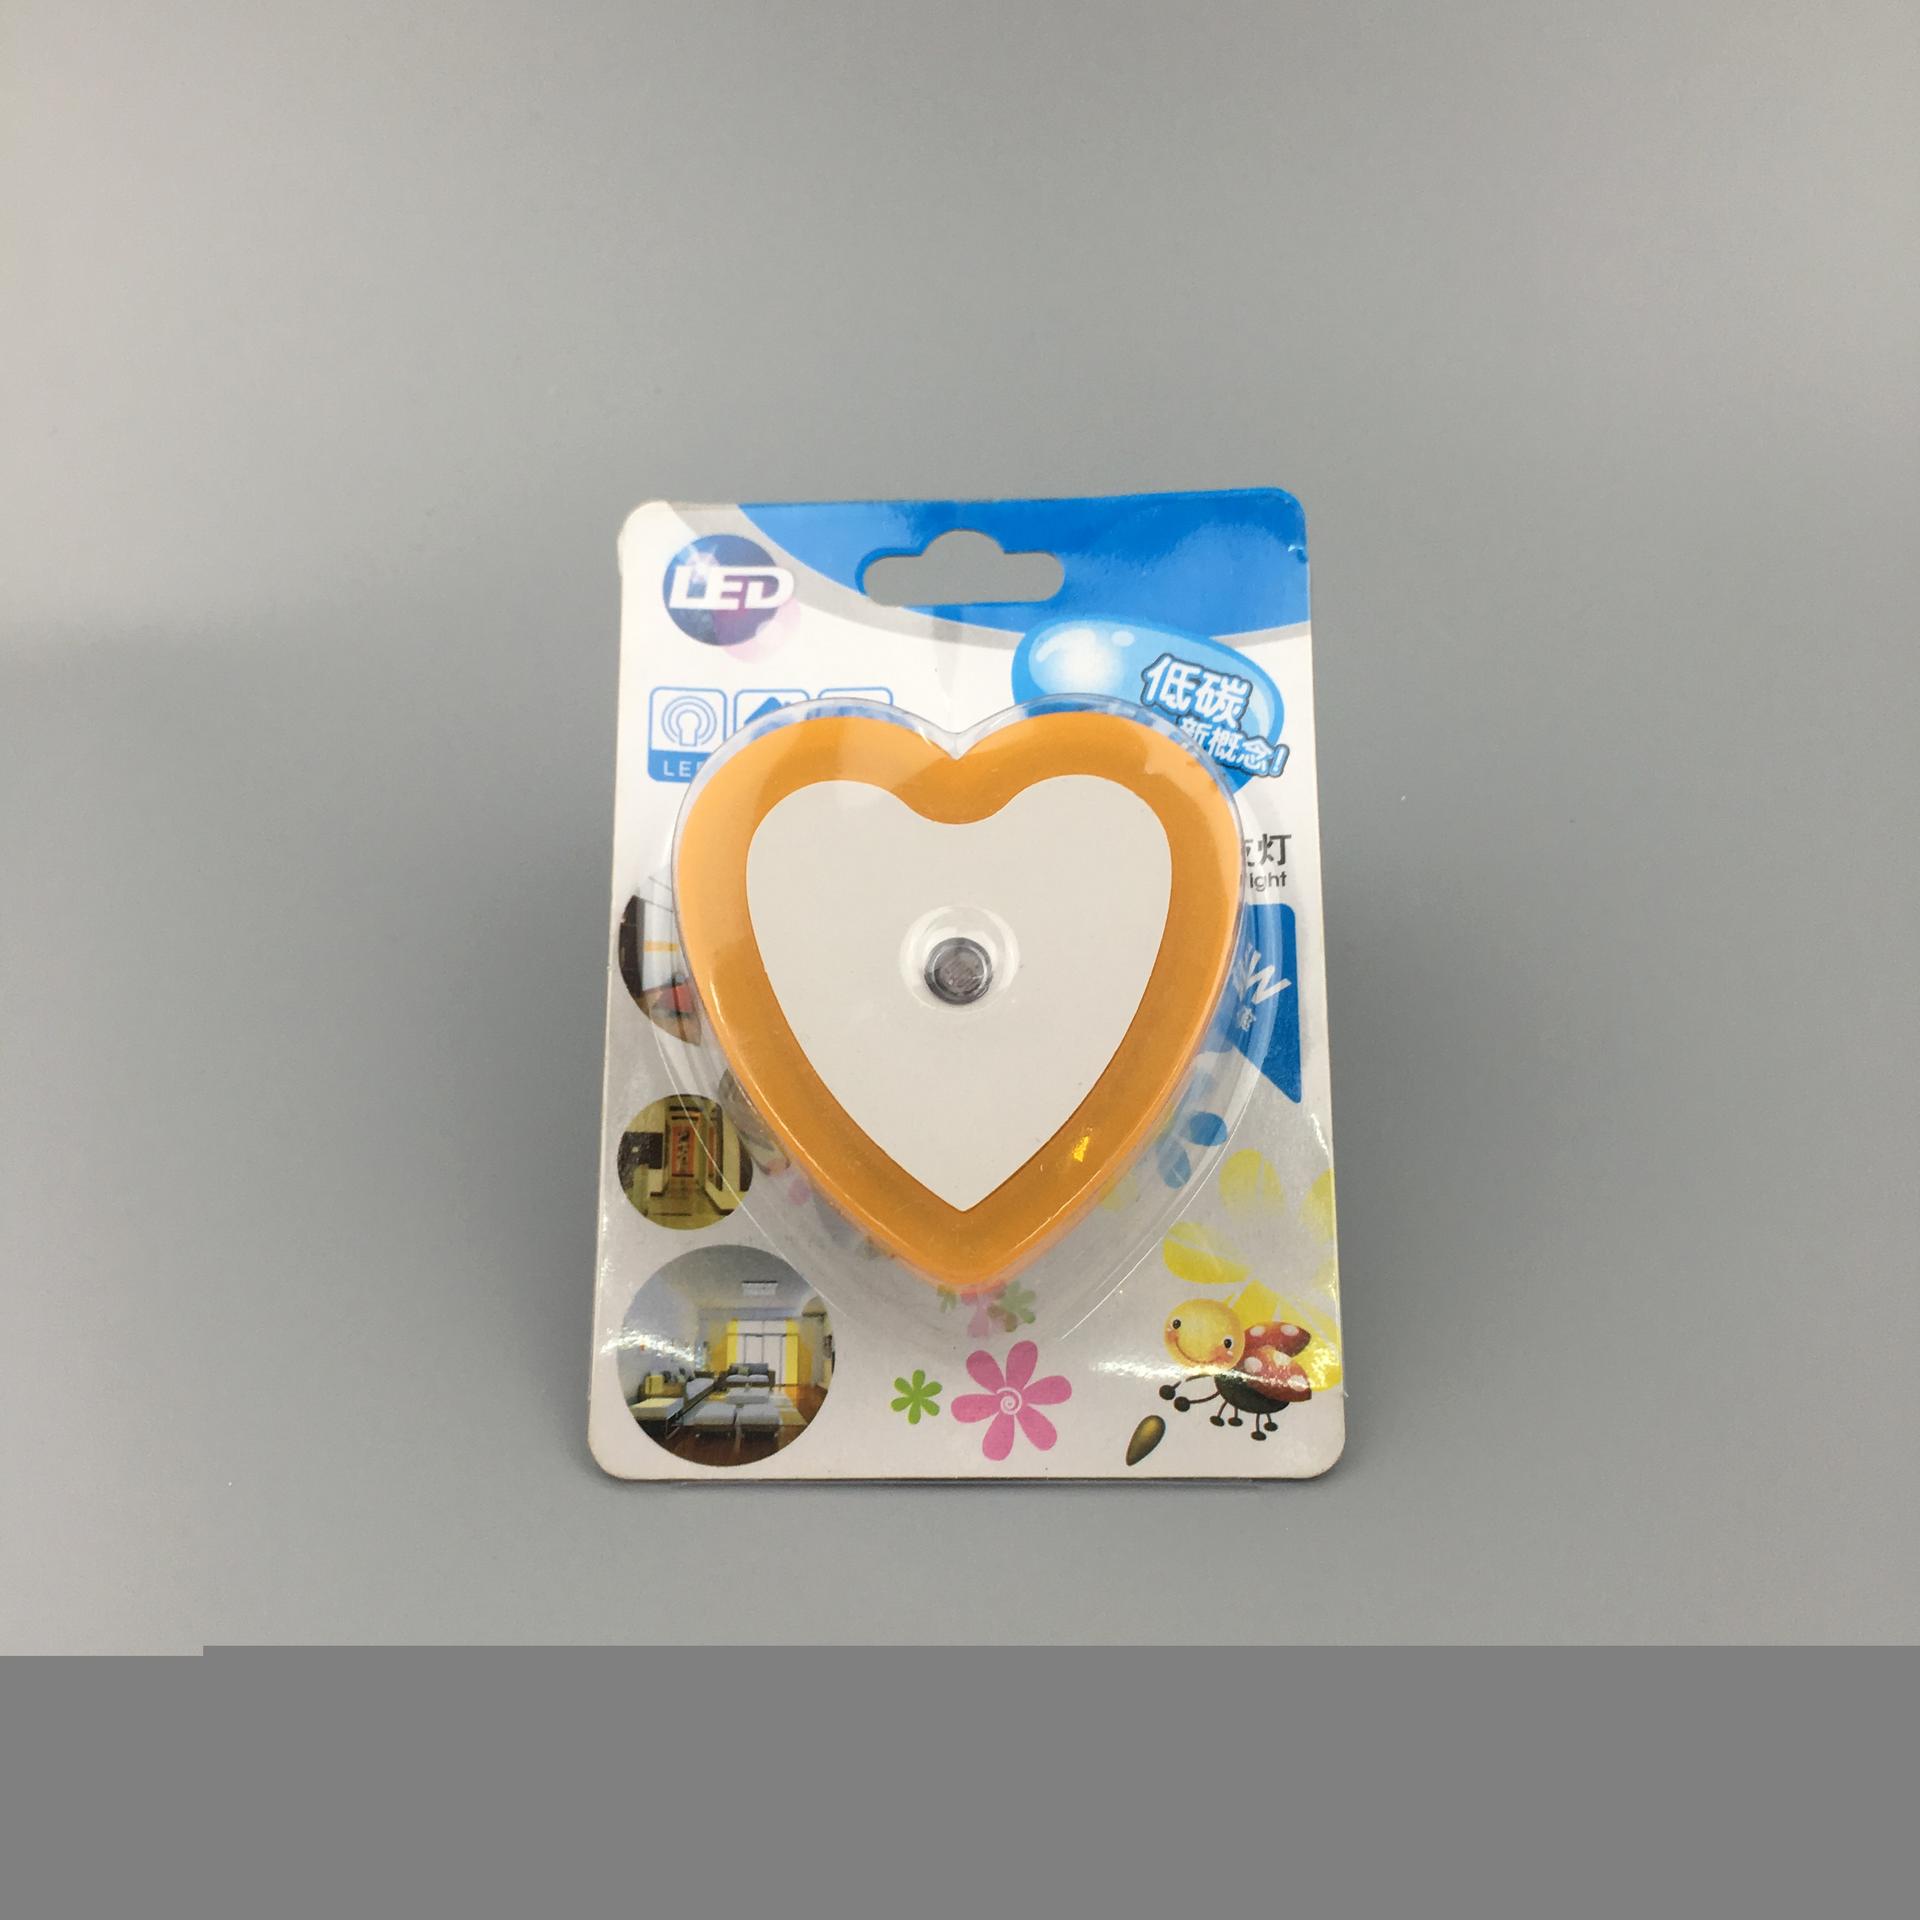 W105 sensor of love heart switch plug in led night light For Baby Bedroomdecoration child gift